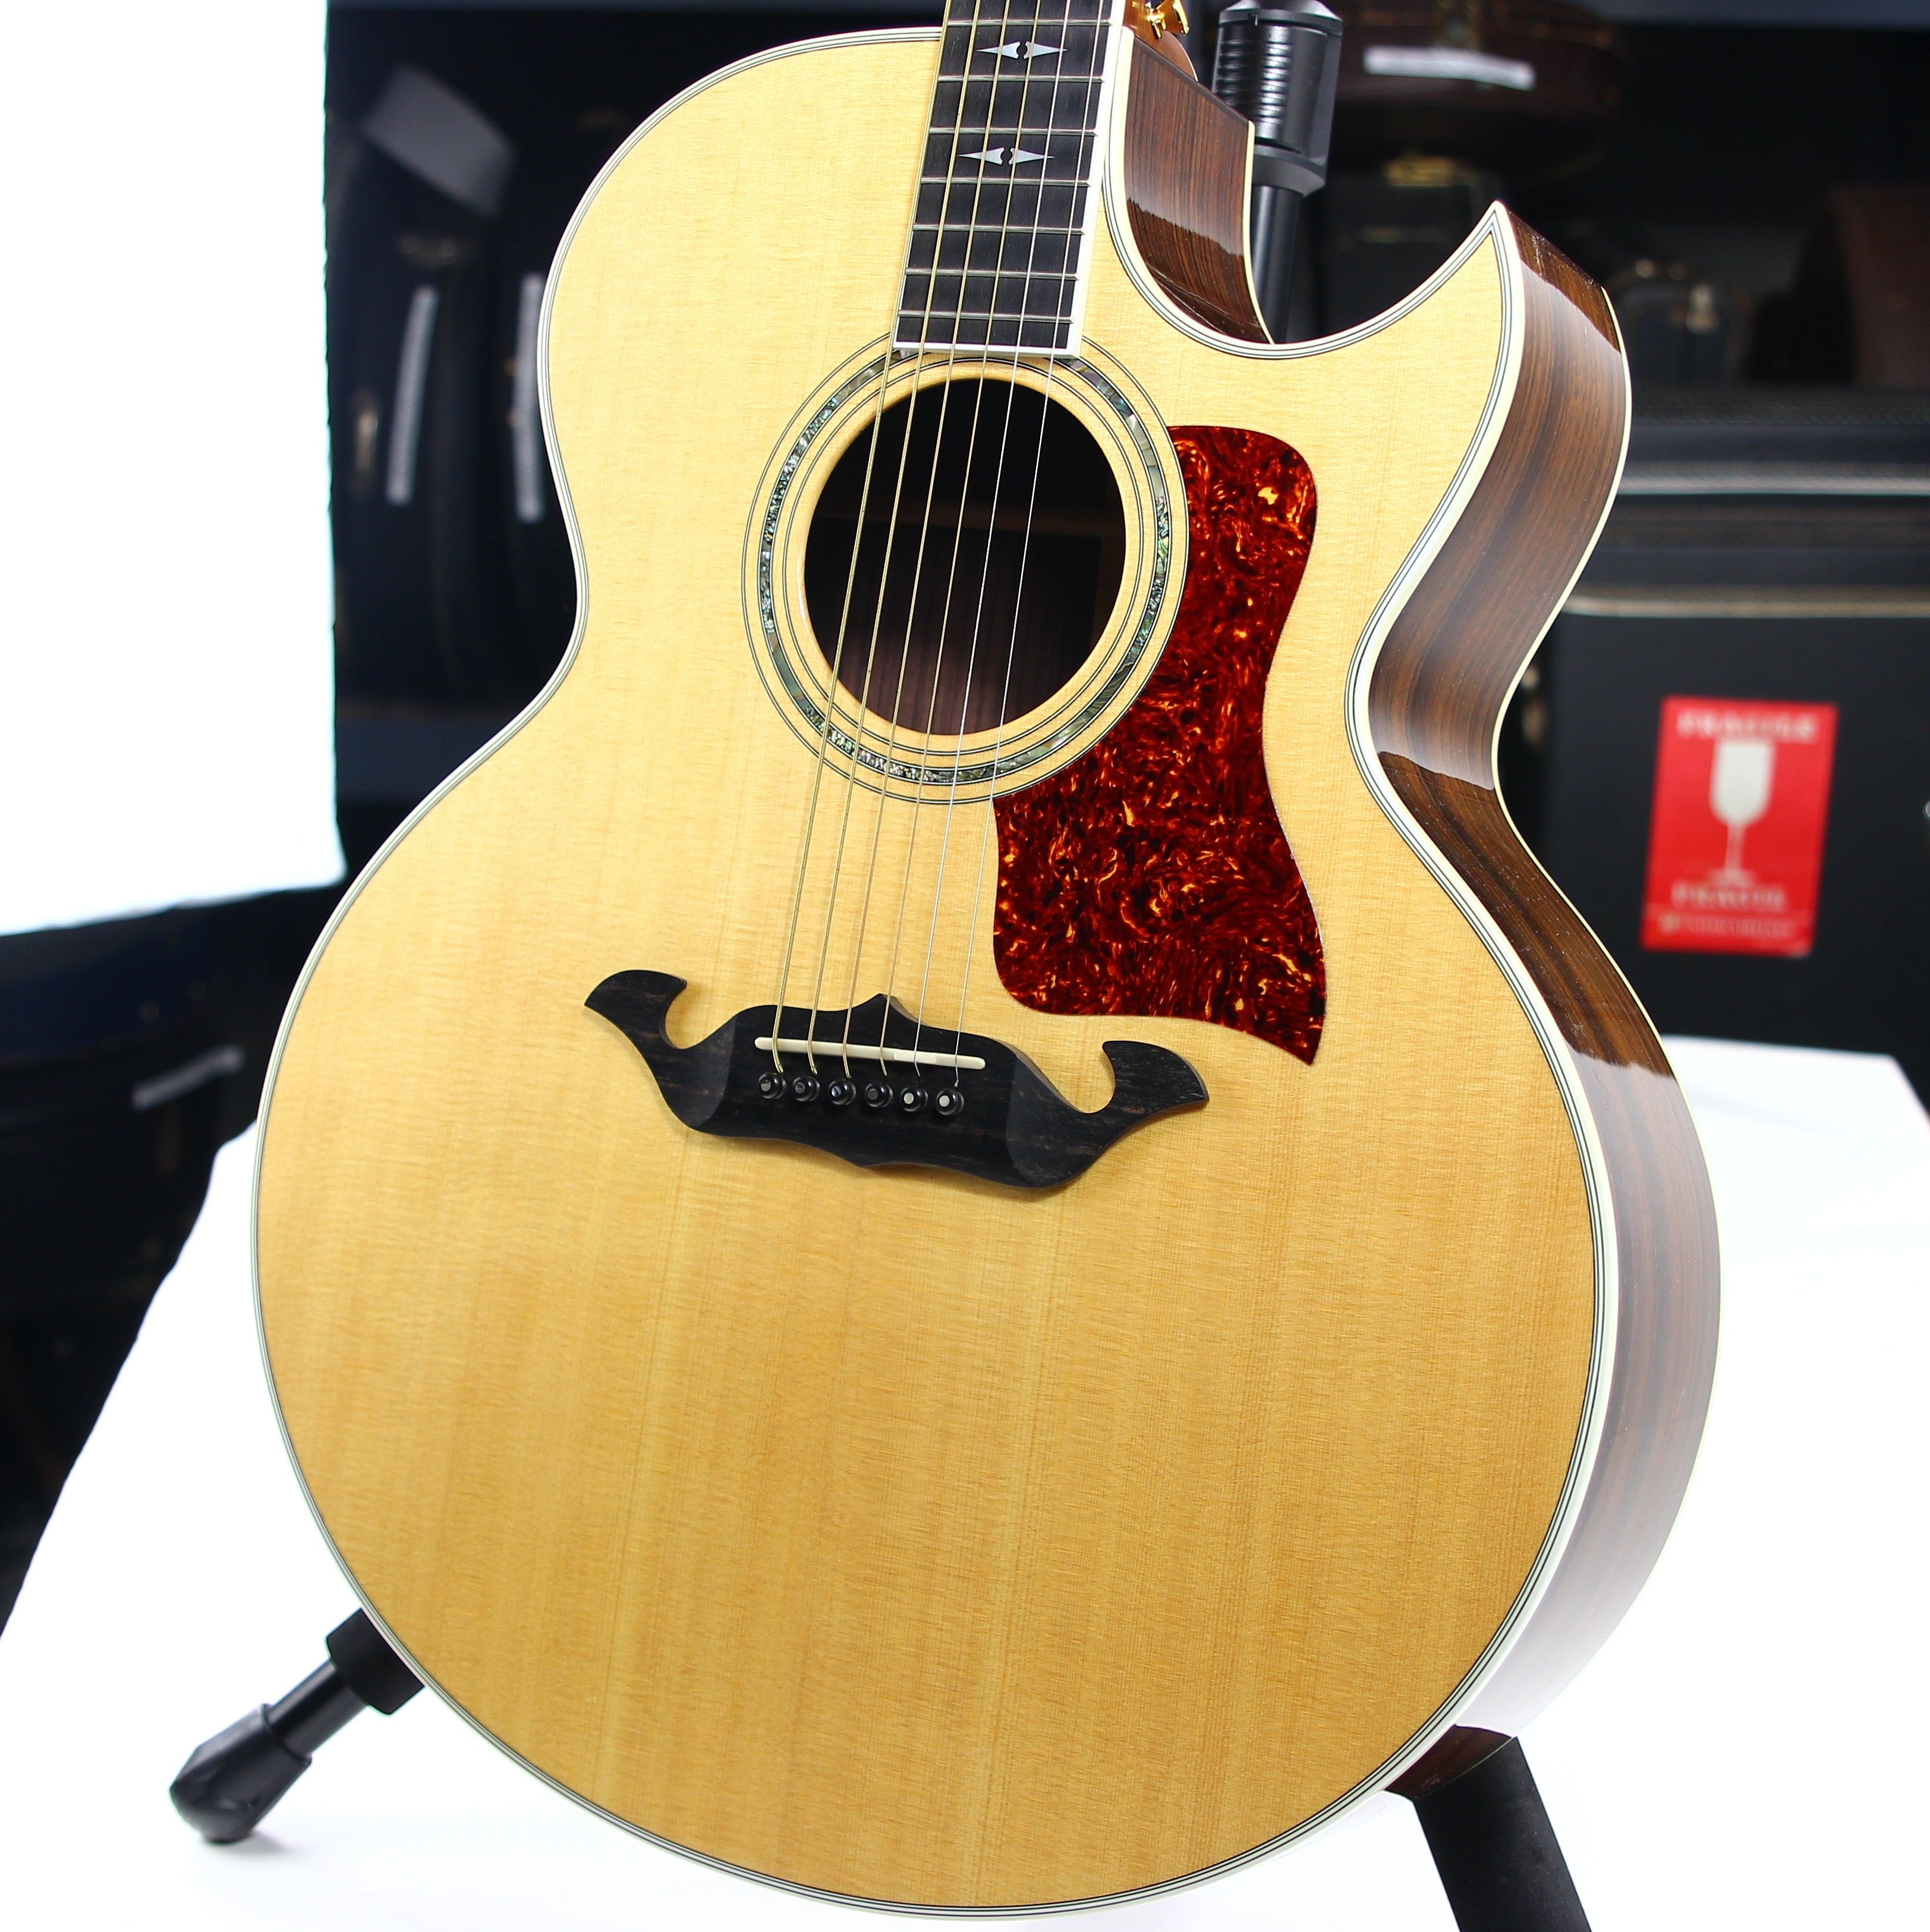 *SOLD*  UNPLAYED! 1994 Taylor 815C Jumbo Acoustic Guitar - Florentine Cutaway, 800 series 810 812 814ce 815ce